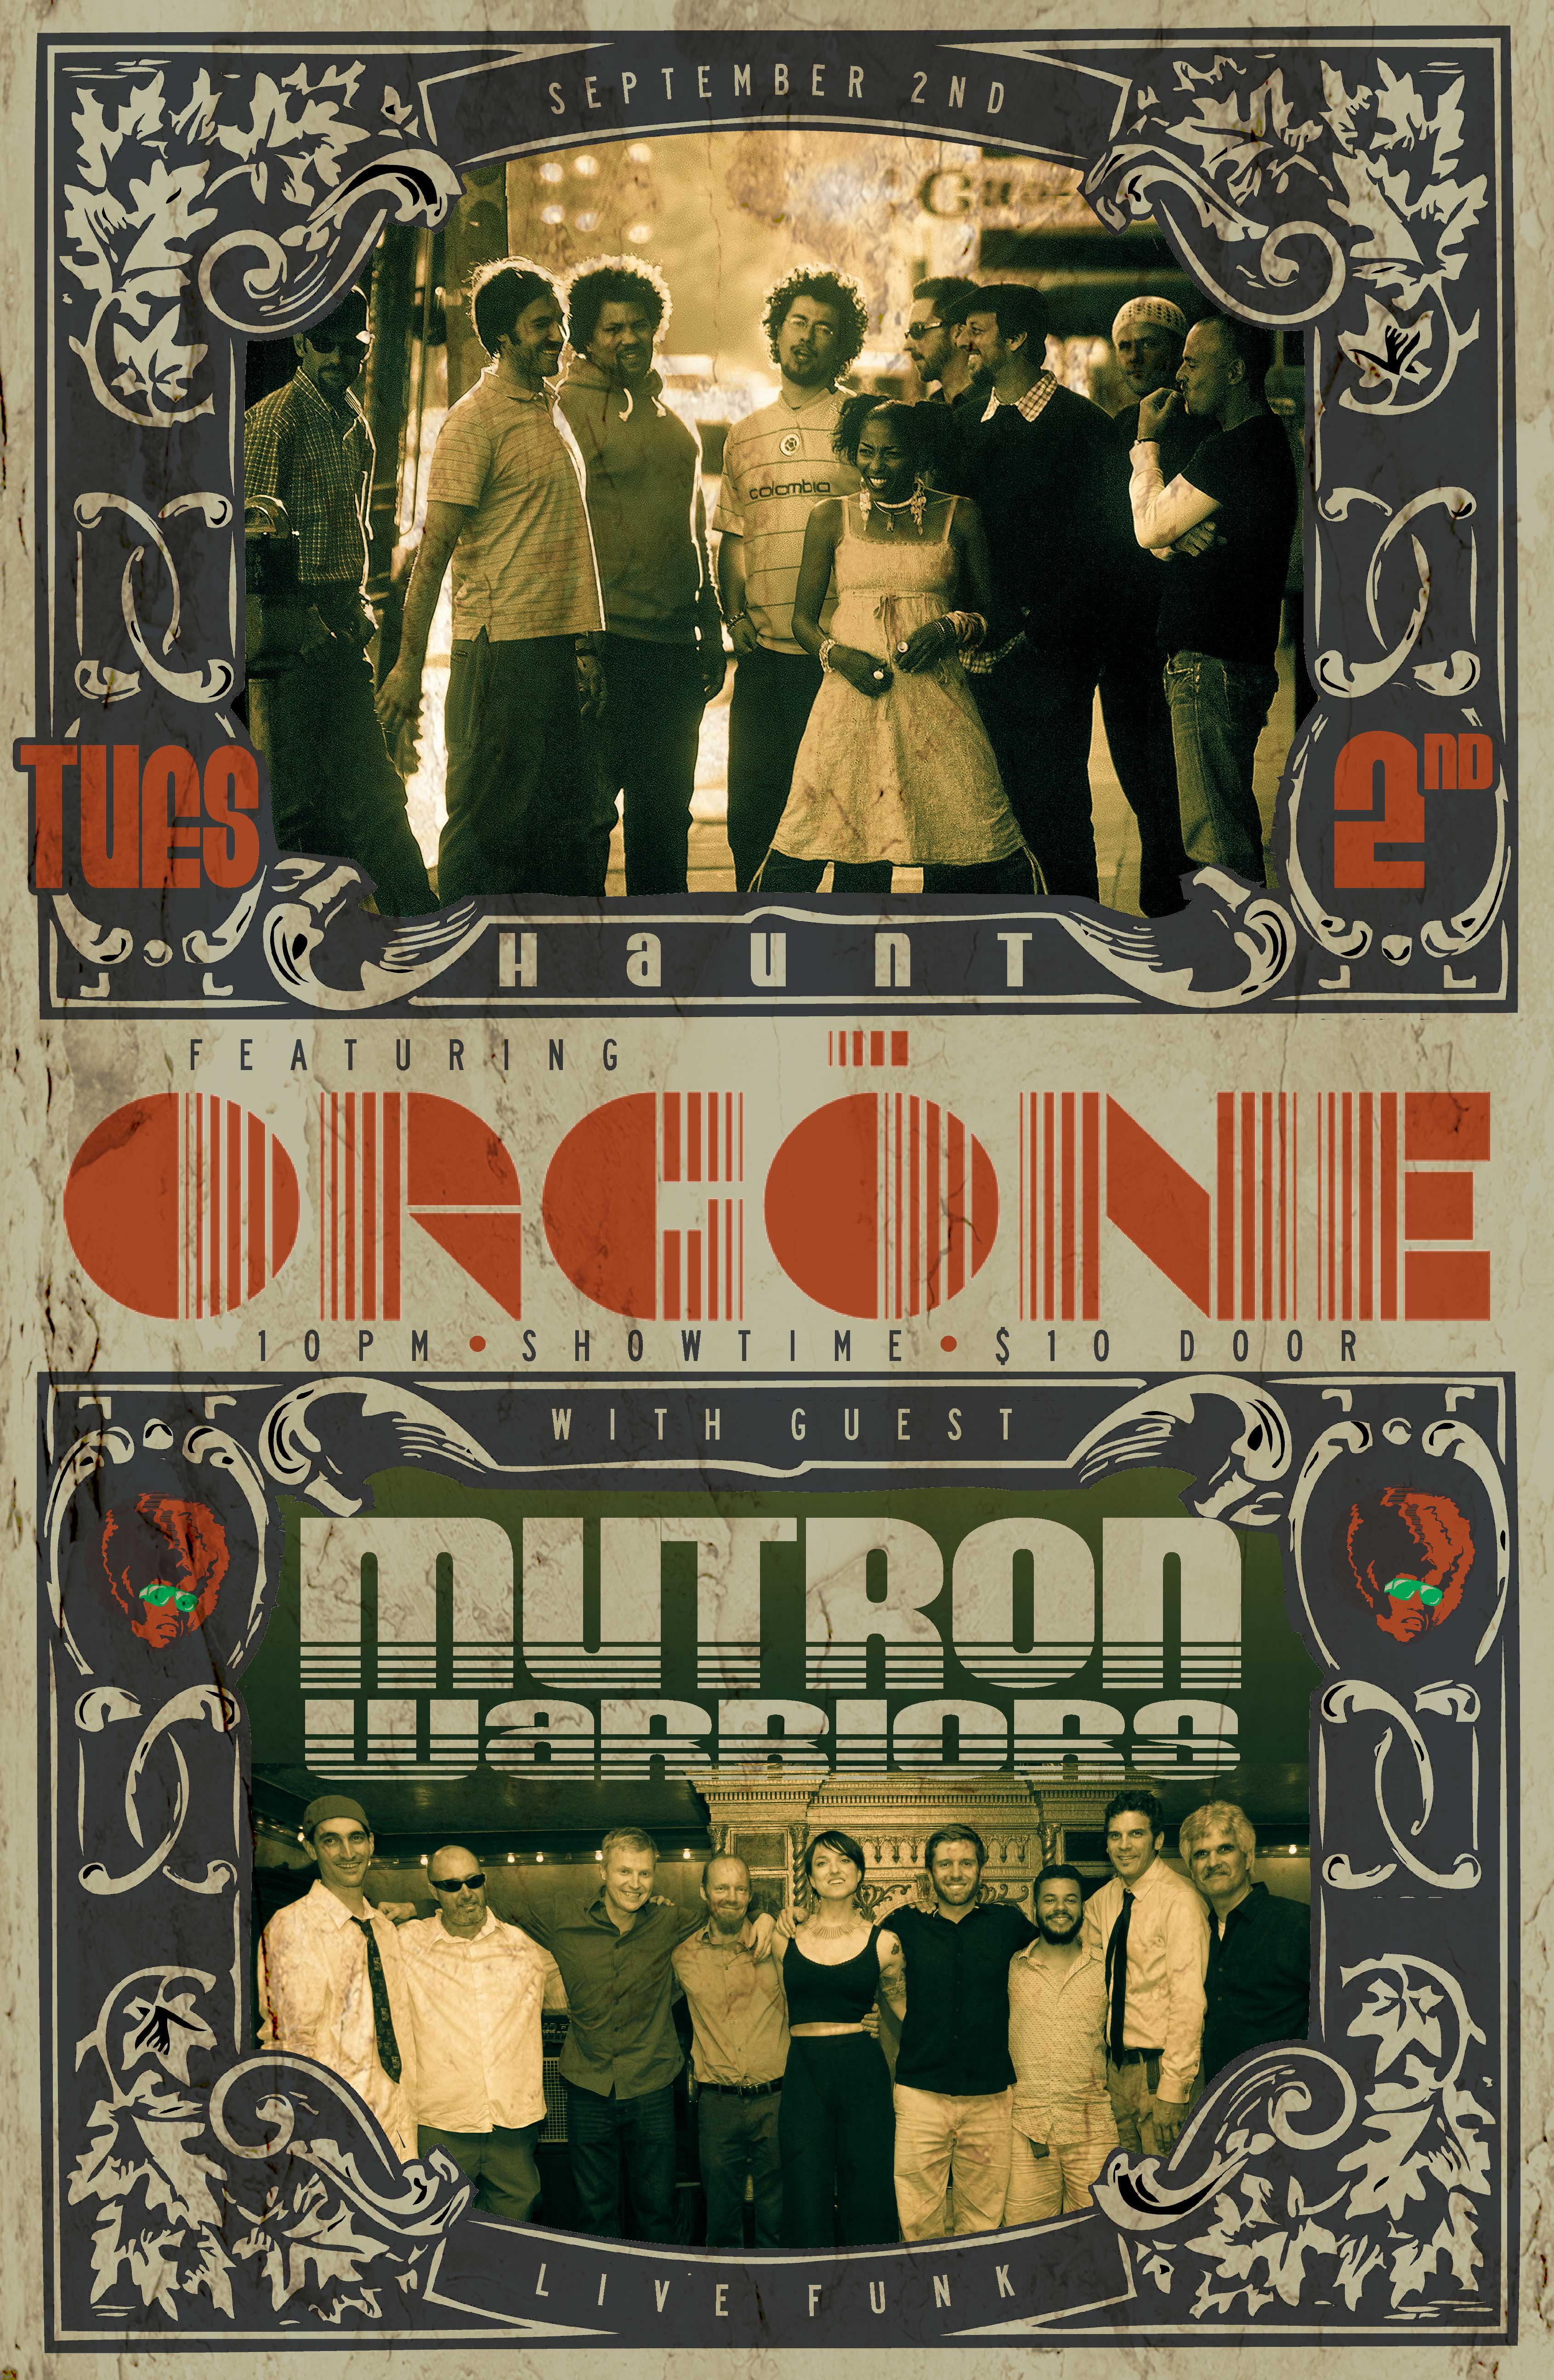 Mutron Warriors and Orgone at the Haunt